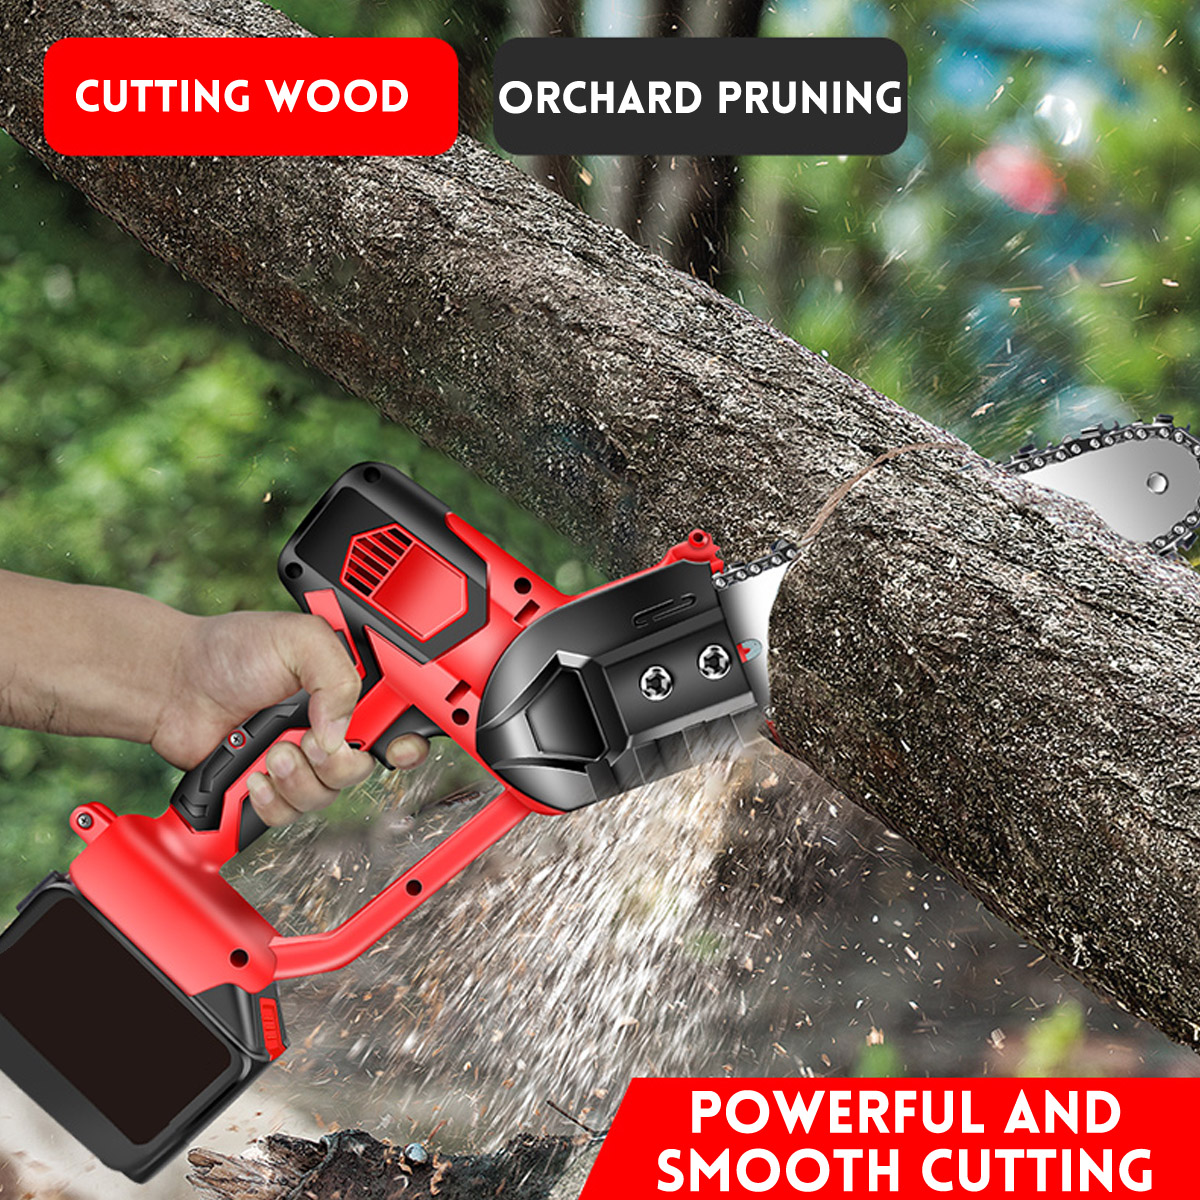 1080W-8-Inch-Electric-Cordless-Chainsaw-Chain-Saw-Handheld-Garden-Wood-Cutting-Tool-W-None1pc-Batter-1829229-5